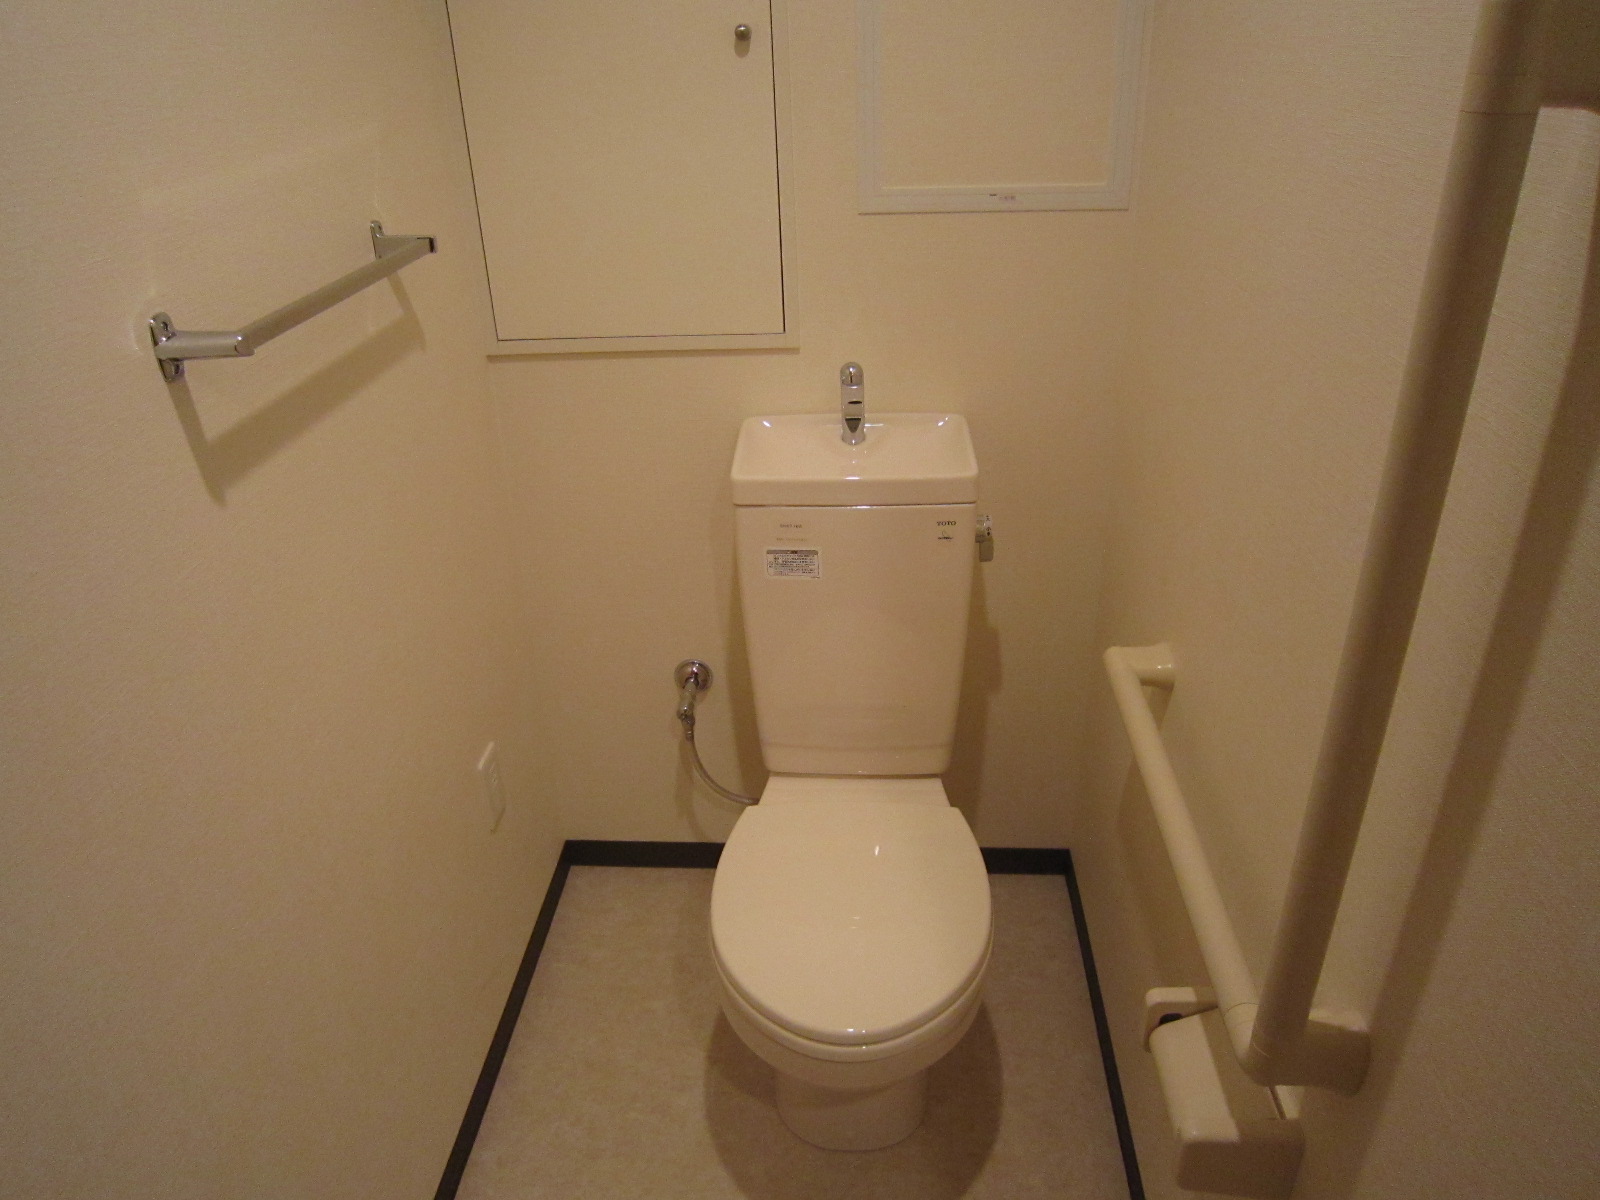 Toilet. Easy-to-use toilet with a shelf or handrail